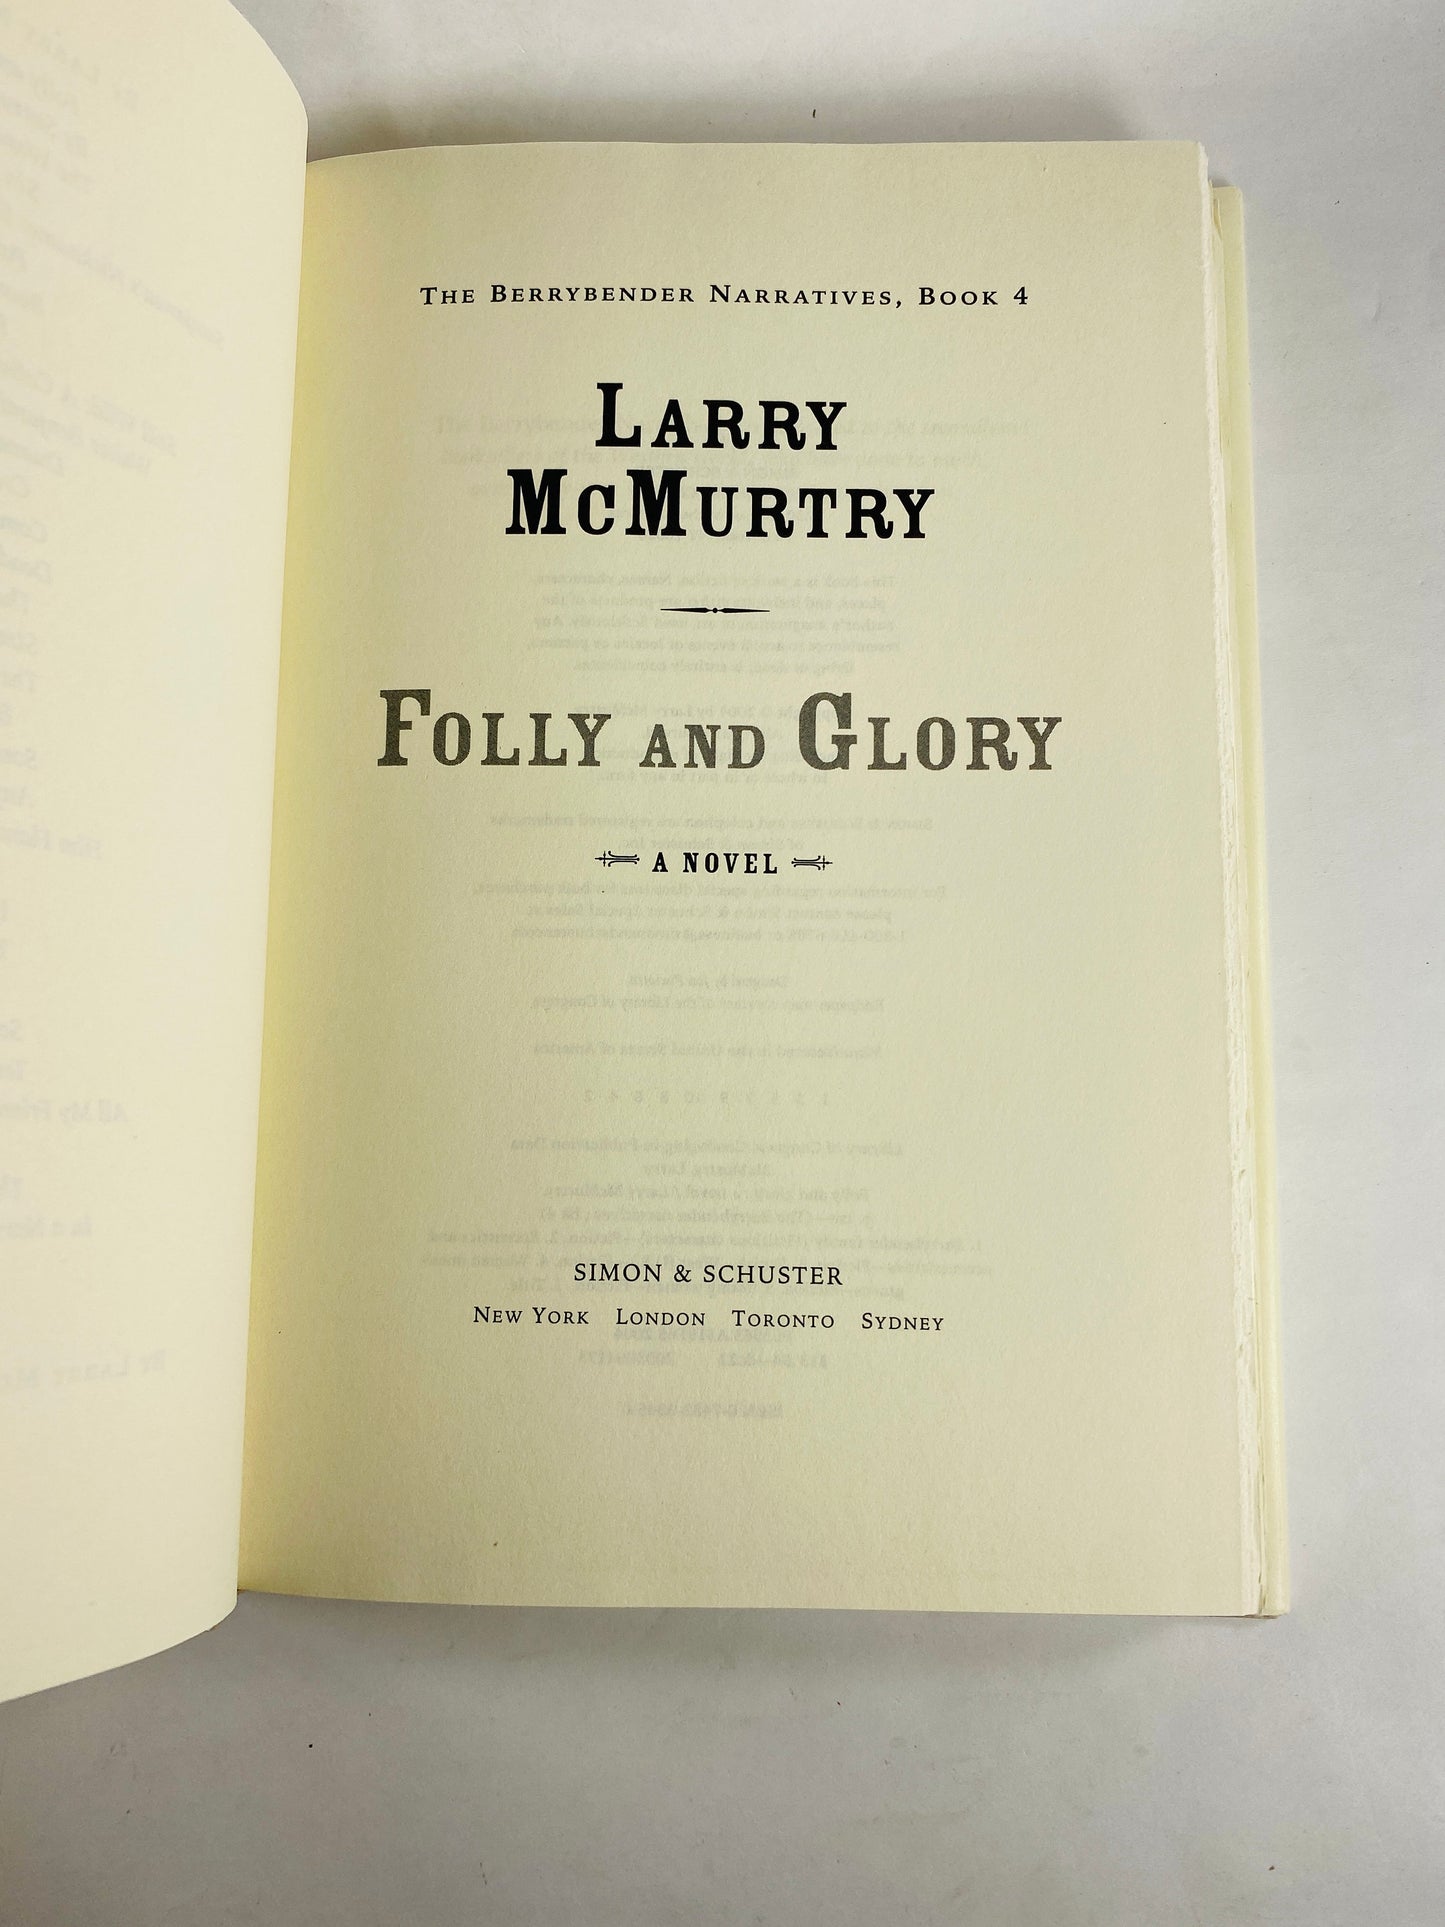 Folly and Glory by Larry McMurtry Vintage FIRST EDITION book Berrybend Narratives Pulitzer Prize author Western Texas Ranger home decor